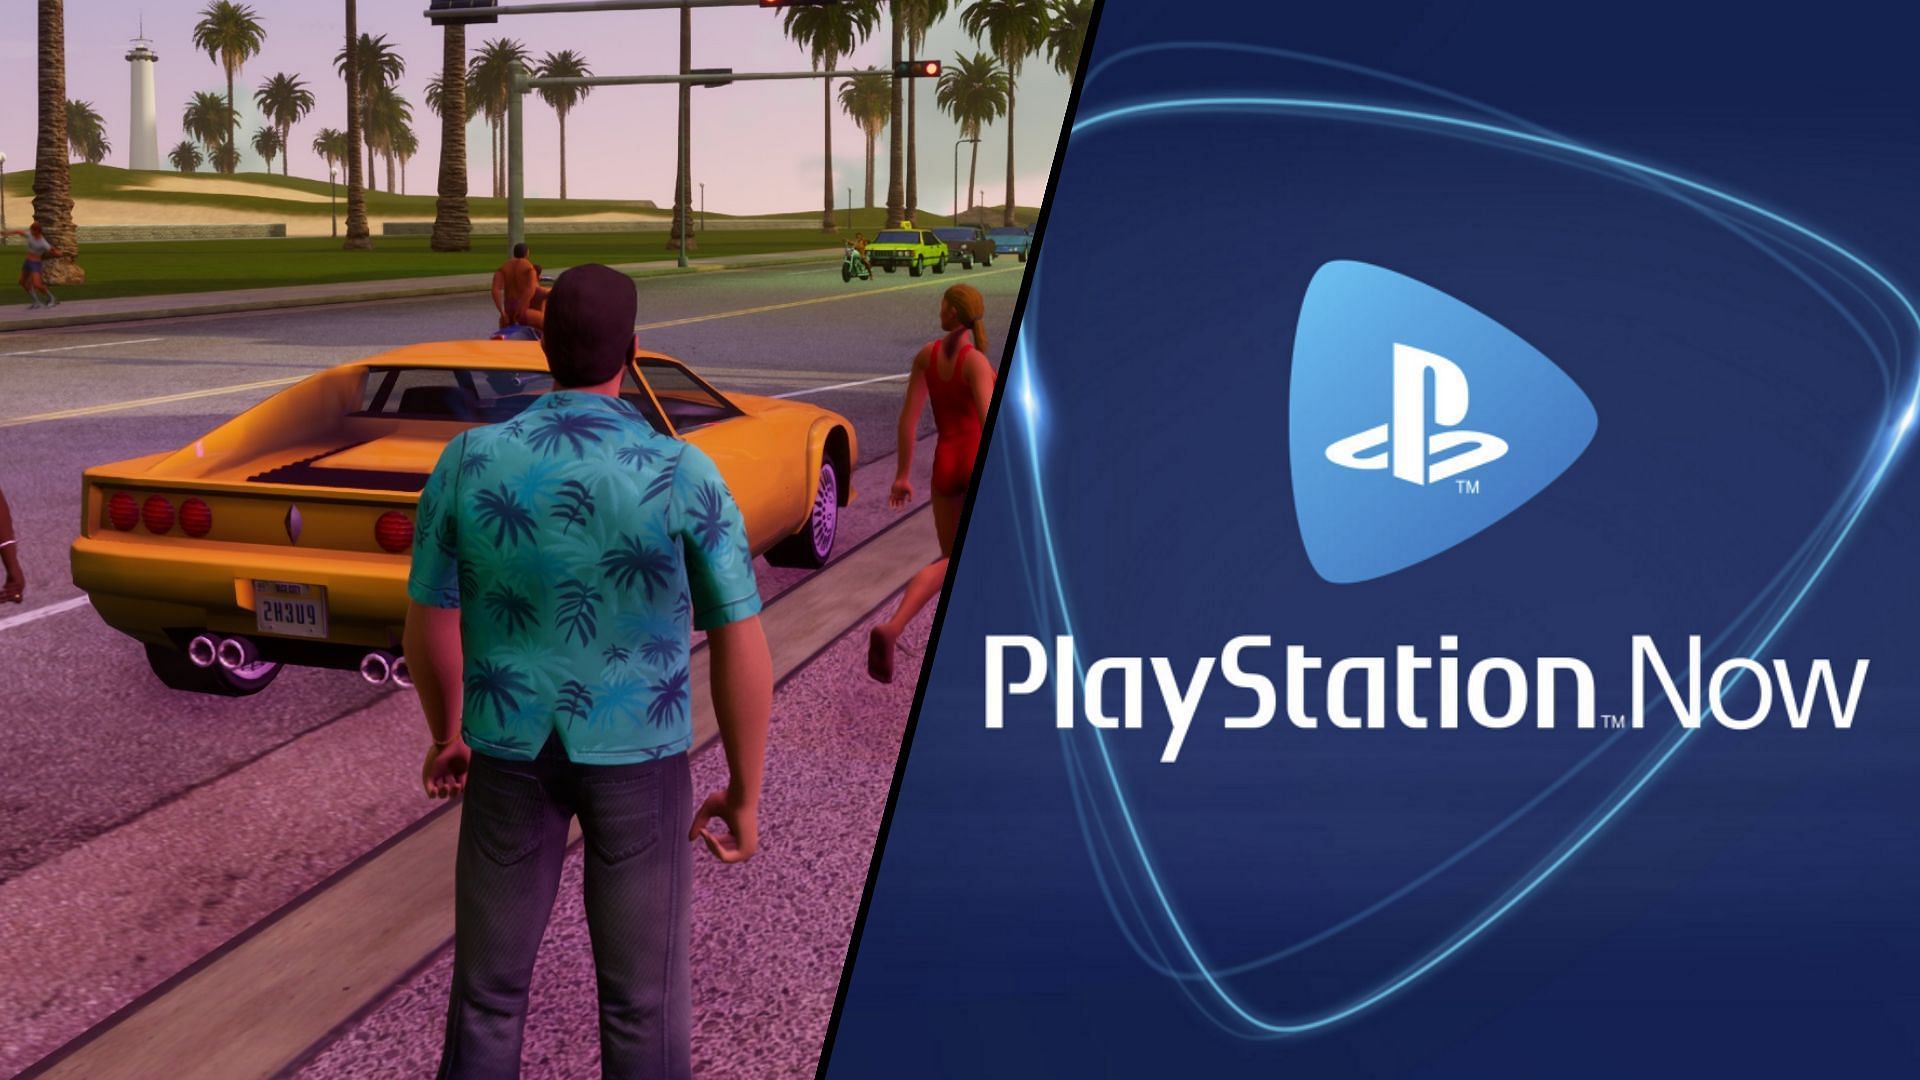 GTA Vice City Definitive Edition is one of the big games in the new lineup (Image via Rockstar Games, PlayStation)